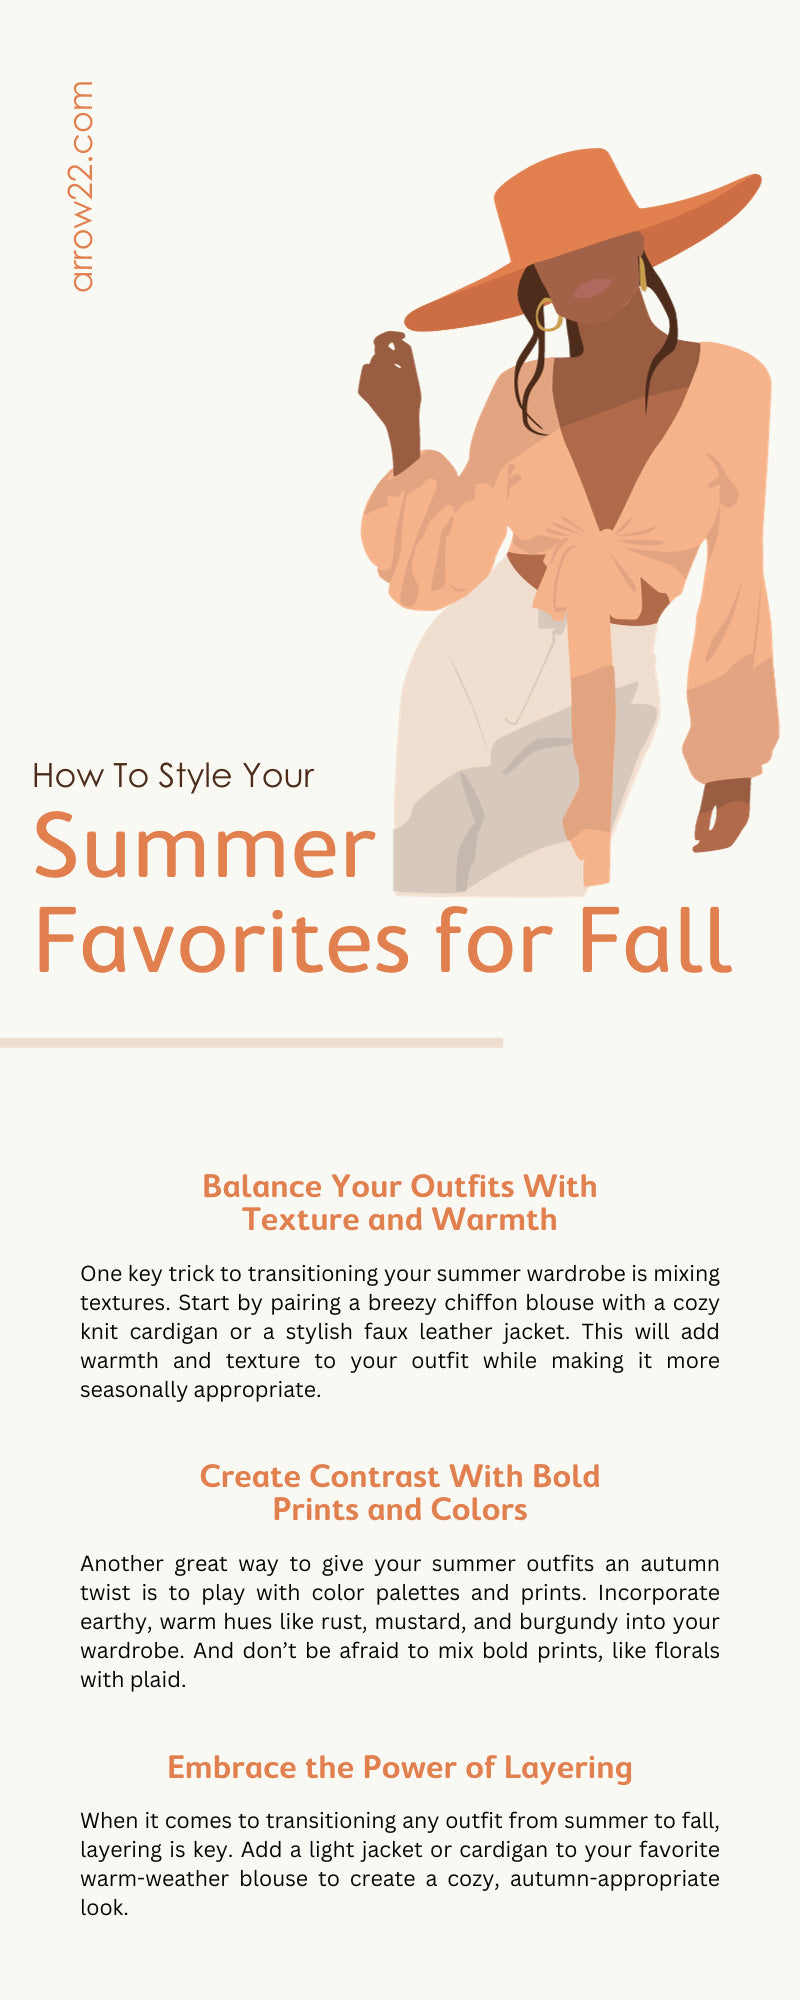 How To Style Your Summer Favorites for Fall